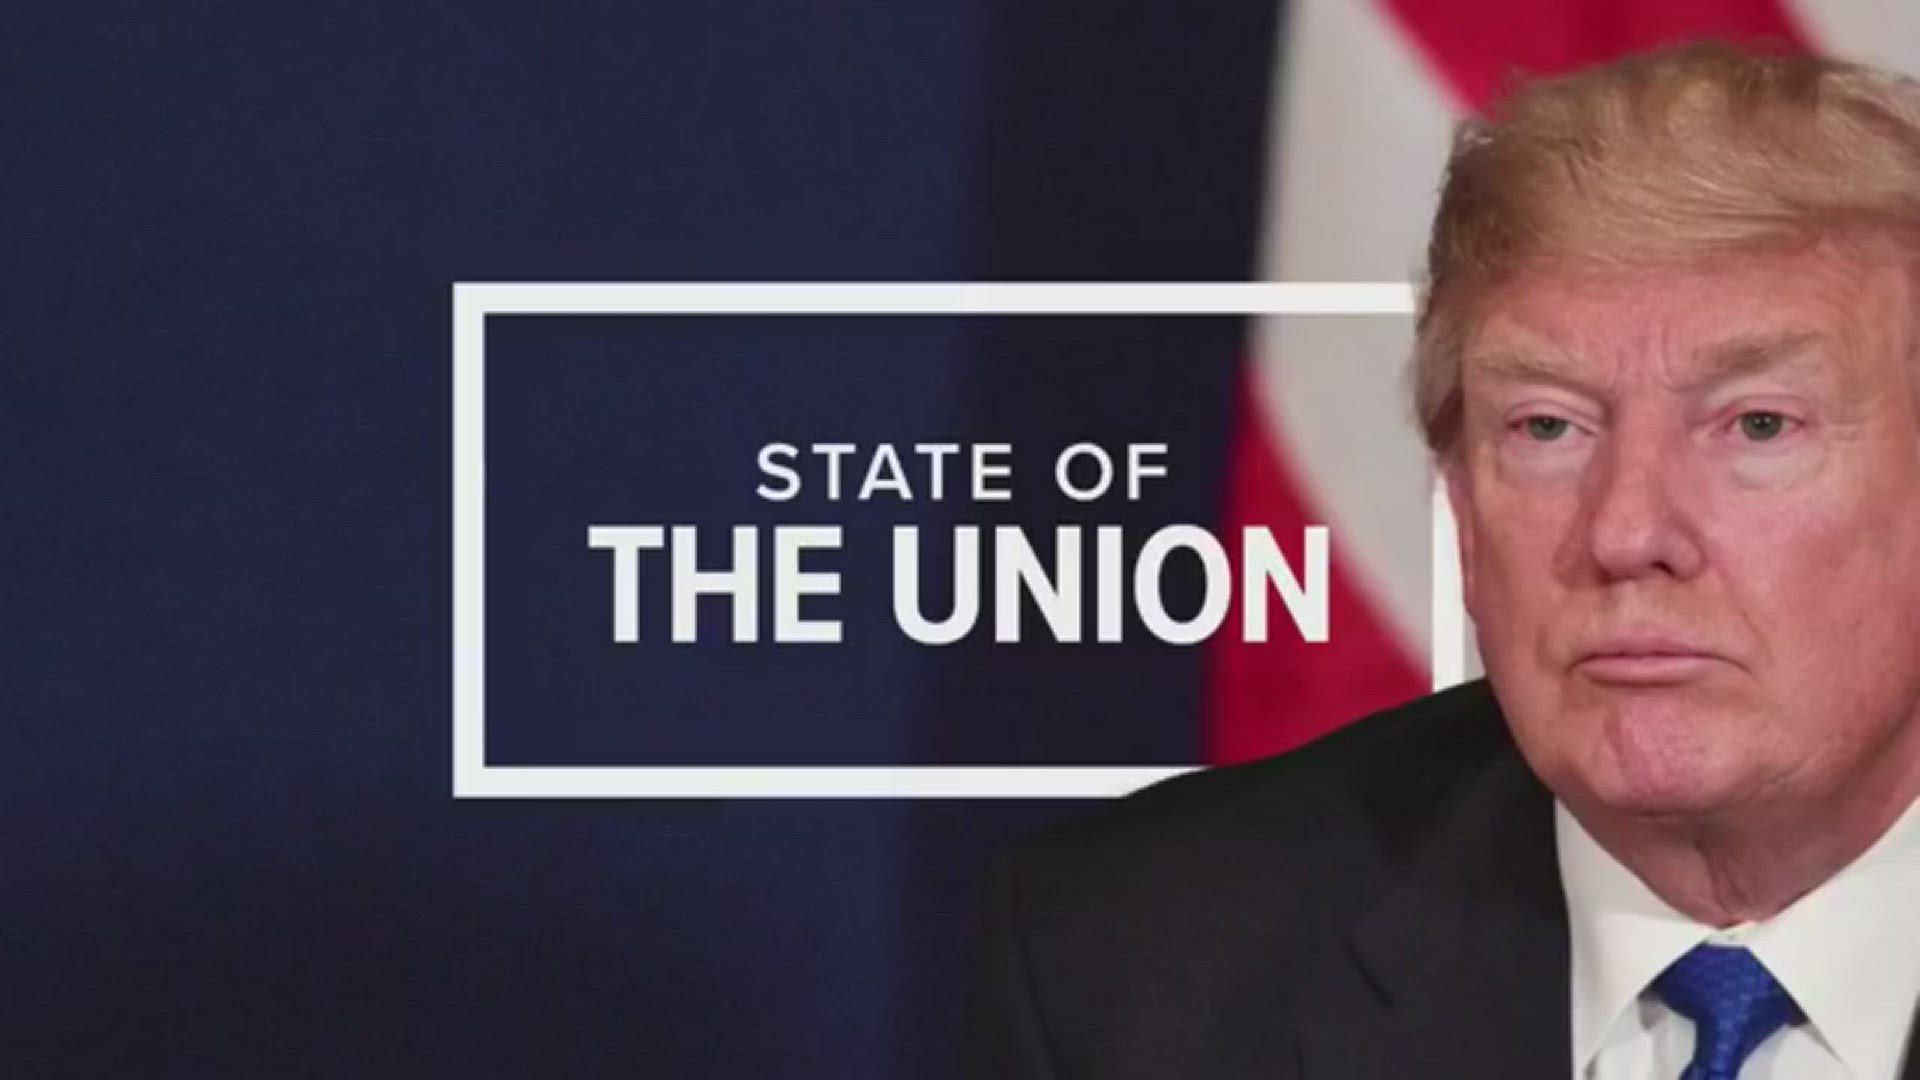 2018 State of the Union in full